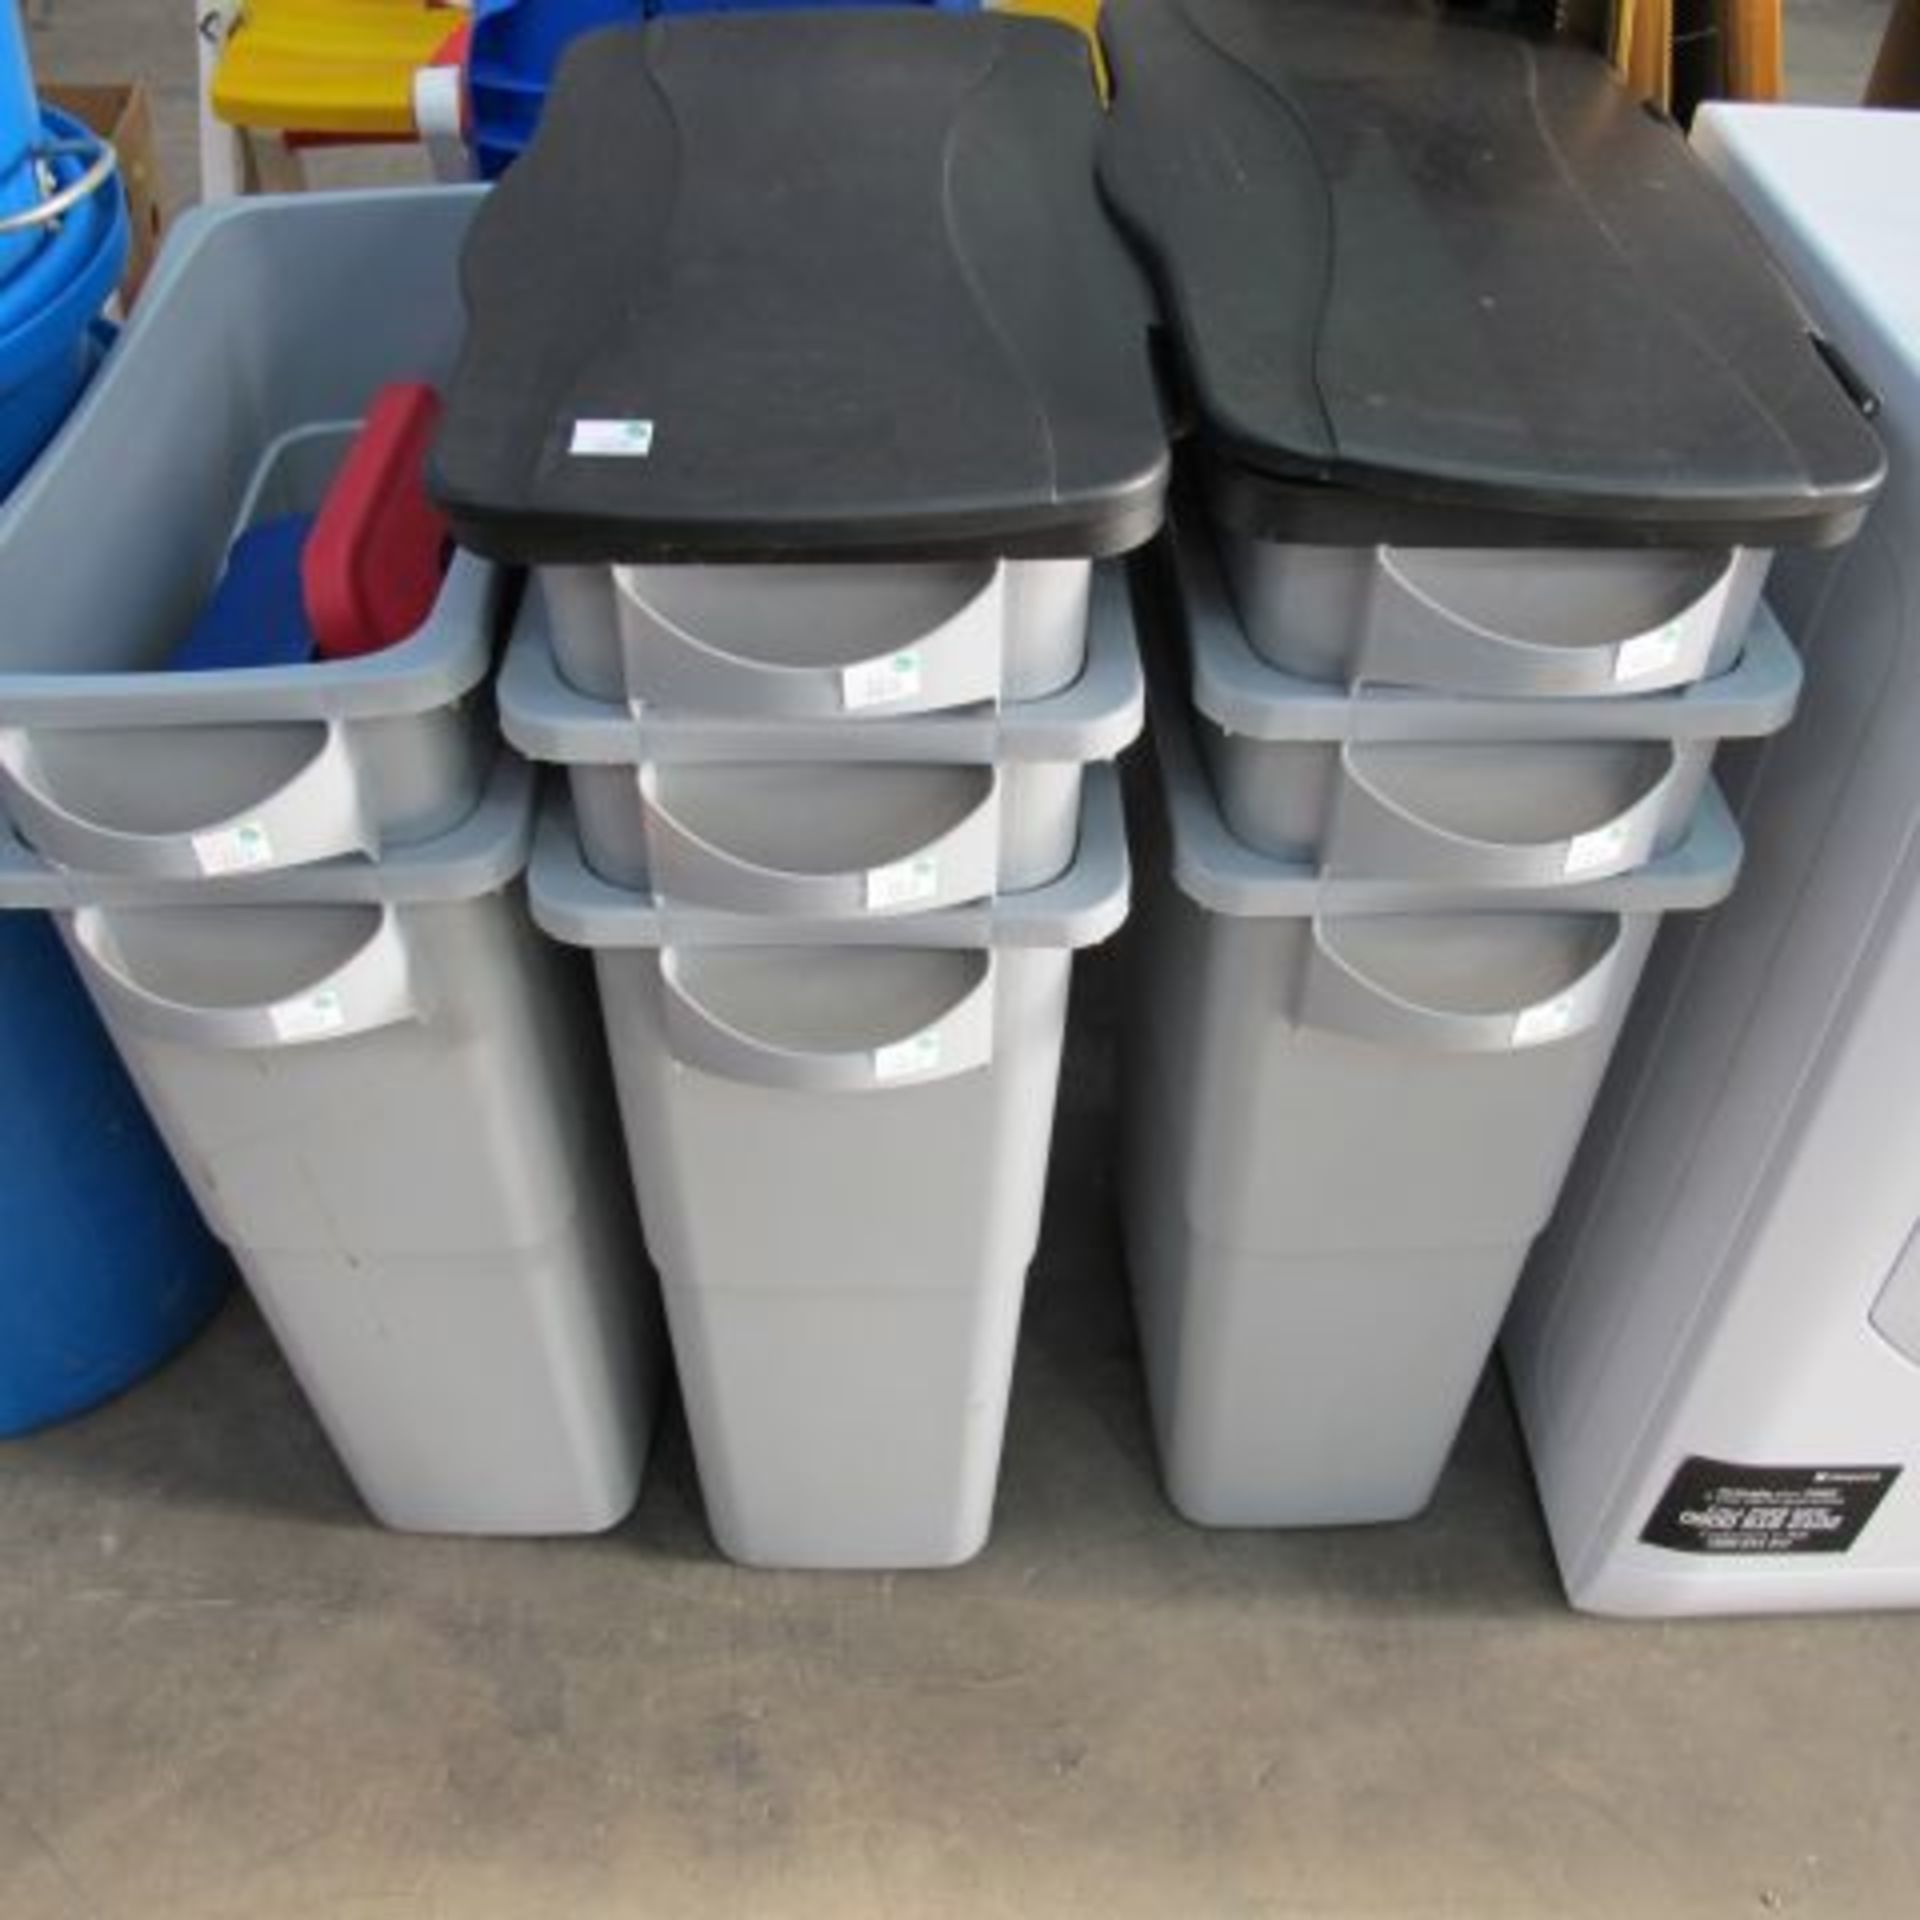 * Eight Grey Rubbermaid Waste/Recycling Bins. Two fitted with hinged black lids, three blue 'flip'